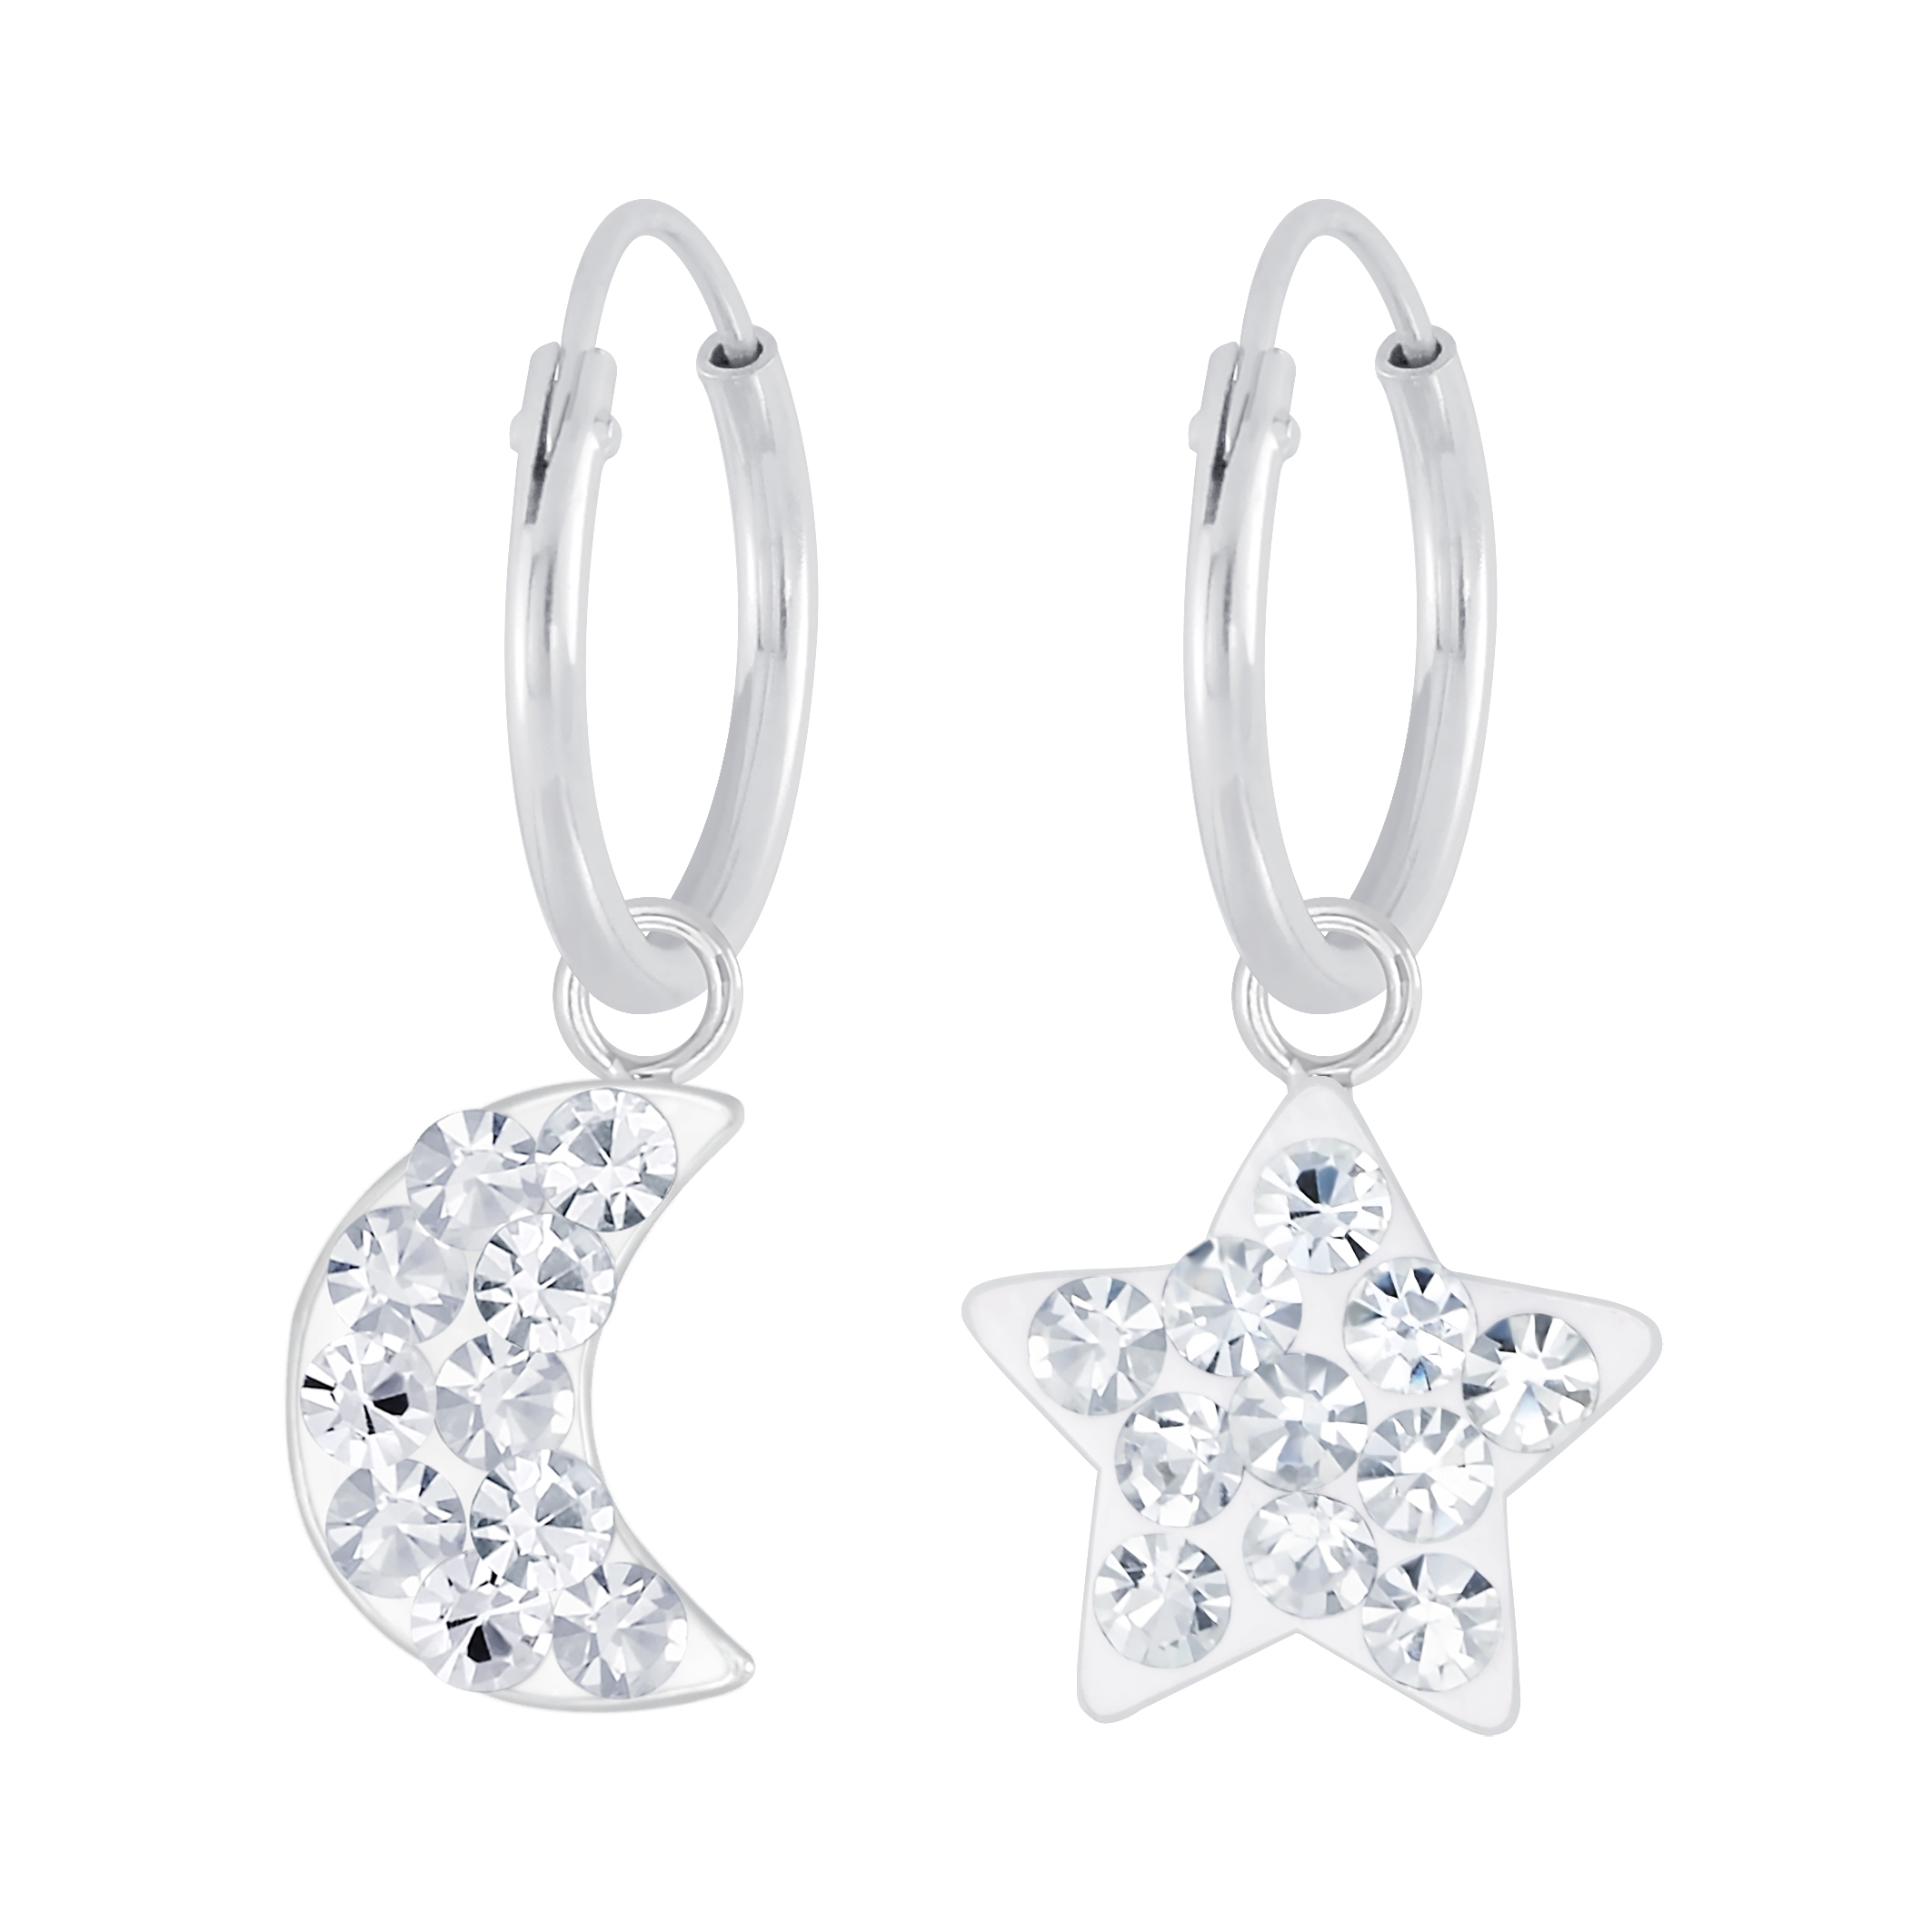 Silver Moon and Star Charm Hoop Earrings - 925 Silver Jewelry